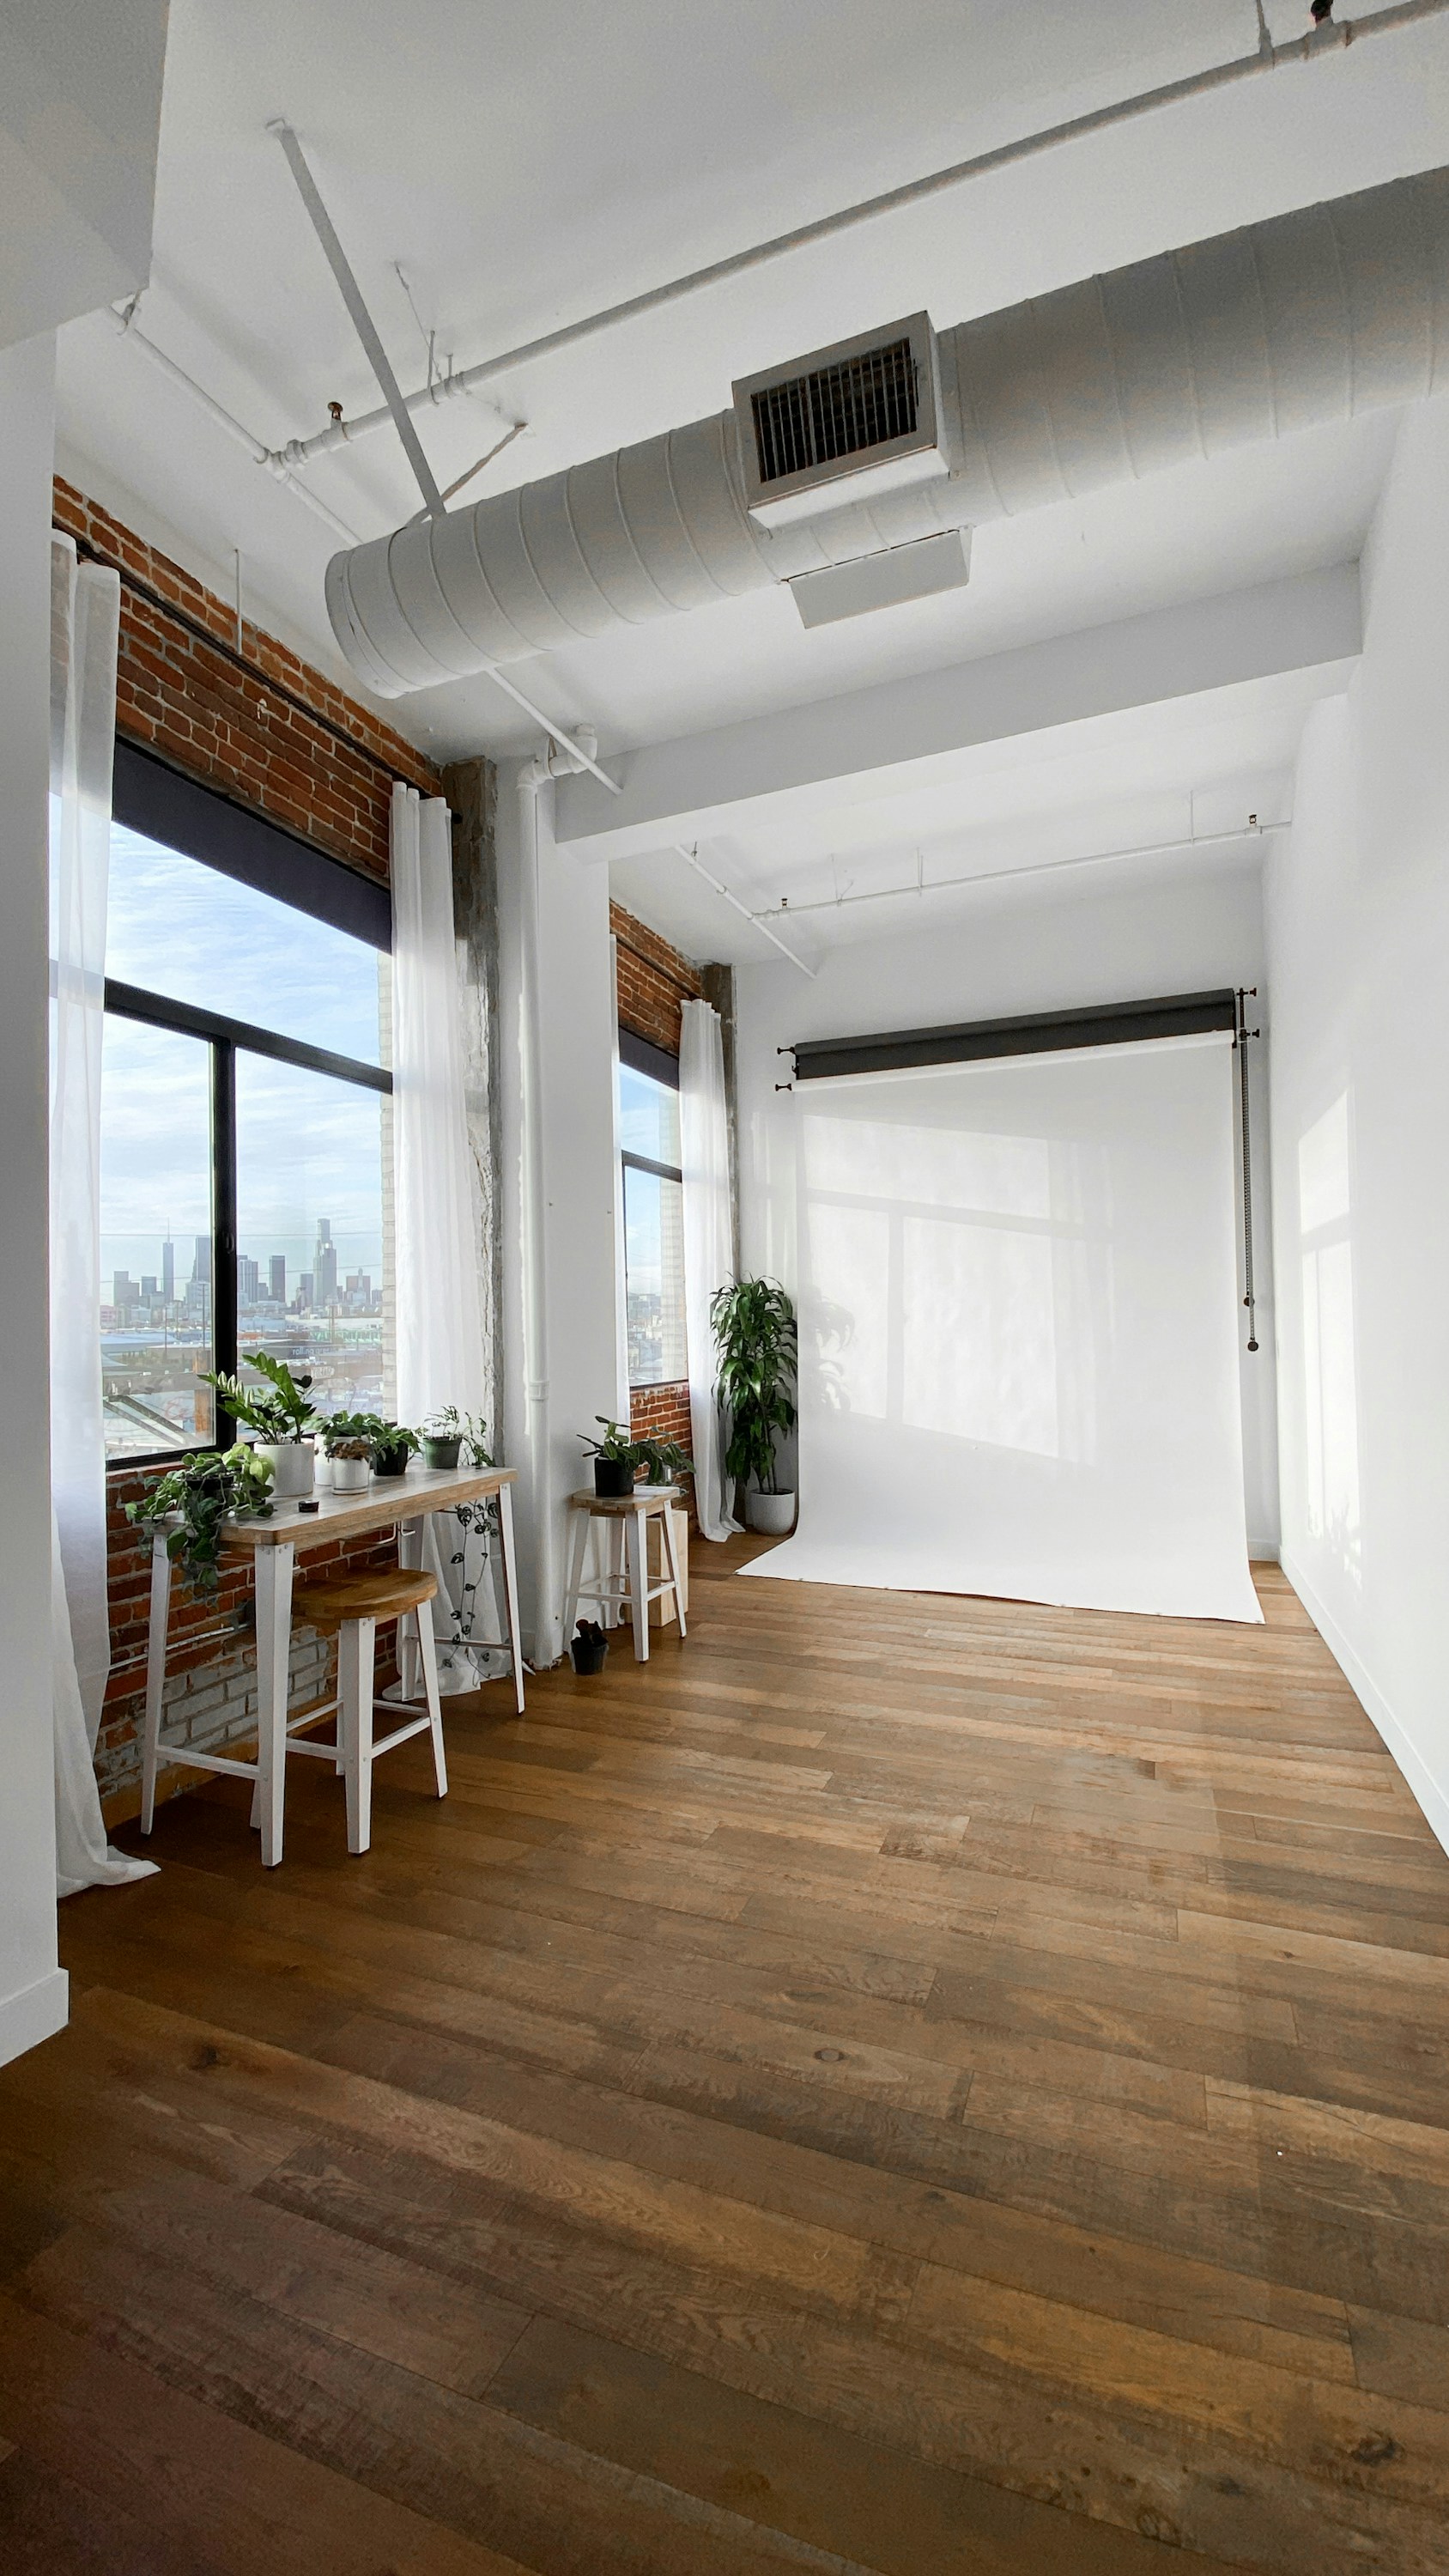 DIY or Hire a Pro? The Ultimate Guide to Hardwood Flooring